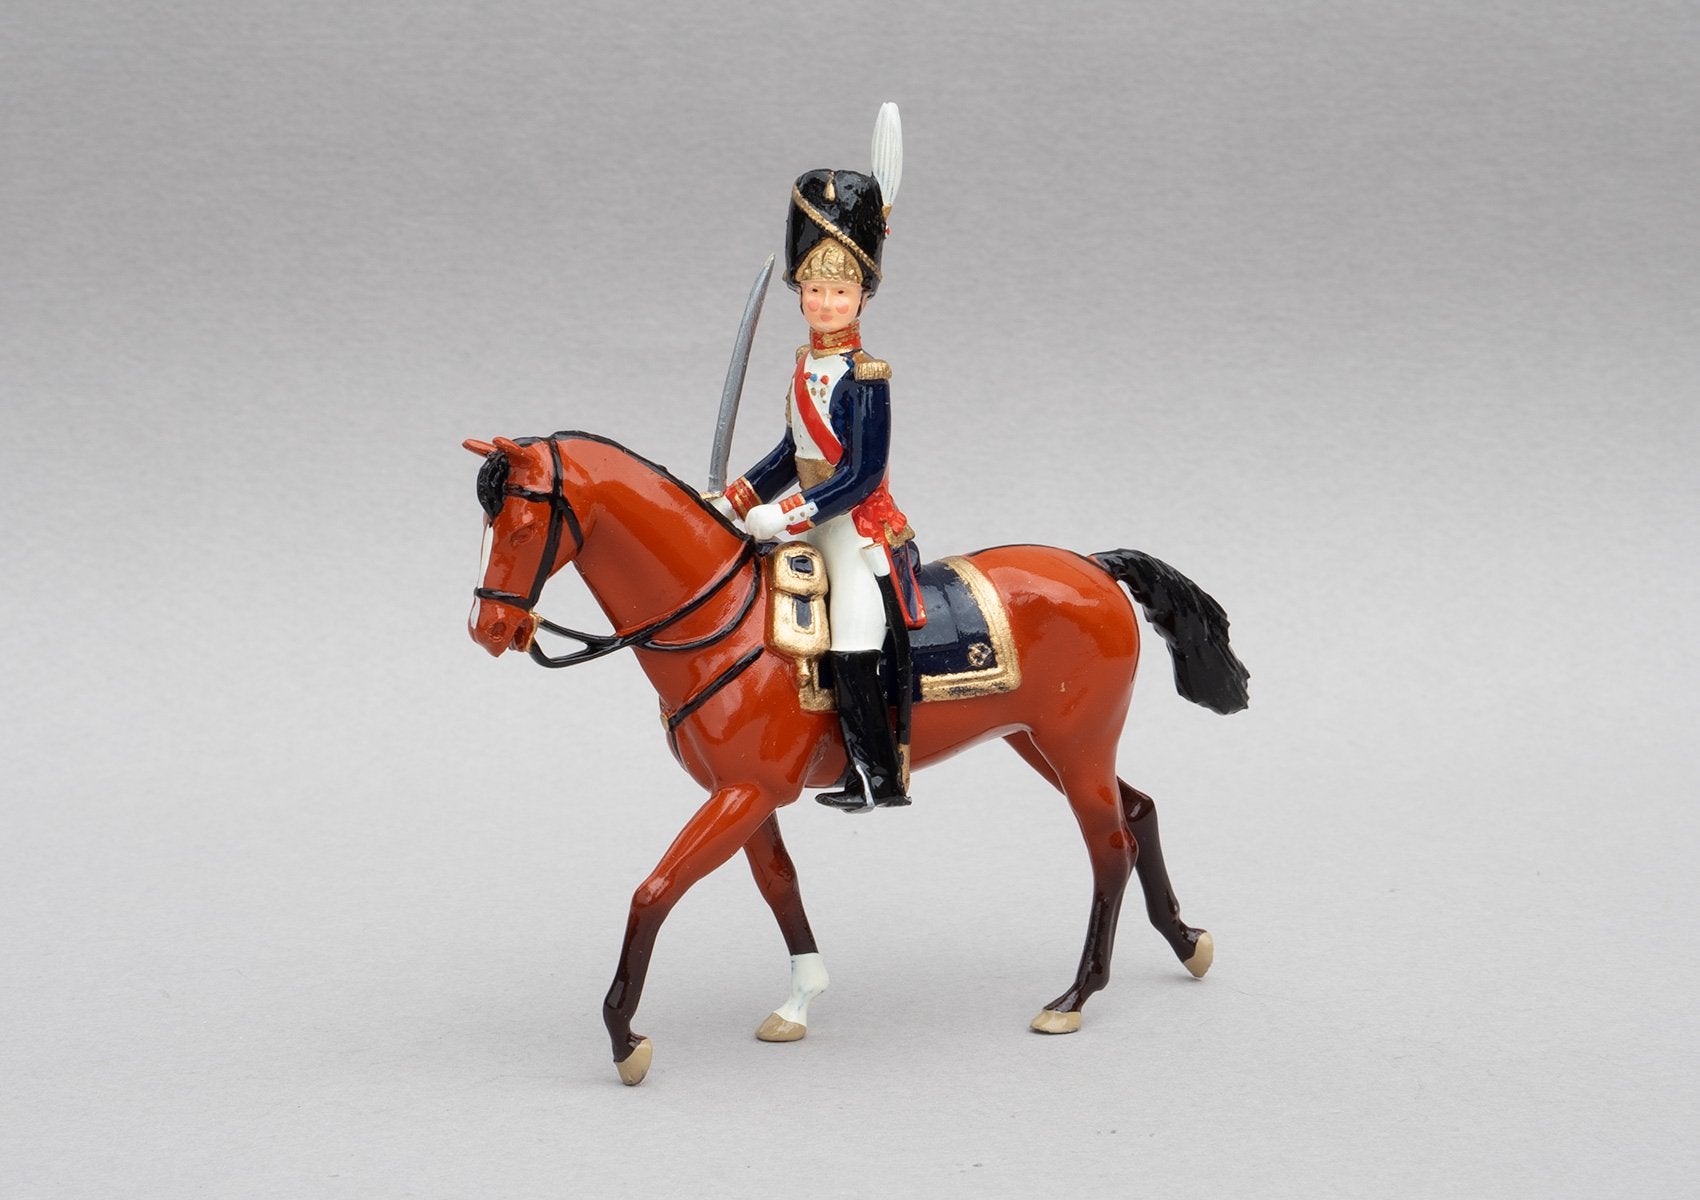 Set 108 General Dorsenne | French Infantry | Napoleonic Wars | French military commander of the Revolutionary and Napoleonic wars. Dressed in the uniform of the Grenadiers of the Guard.  Single mounted officer on chestnut horse | Waterloo | © Imperial Productions | Sculpt by David Cowe